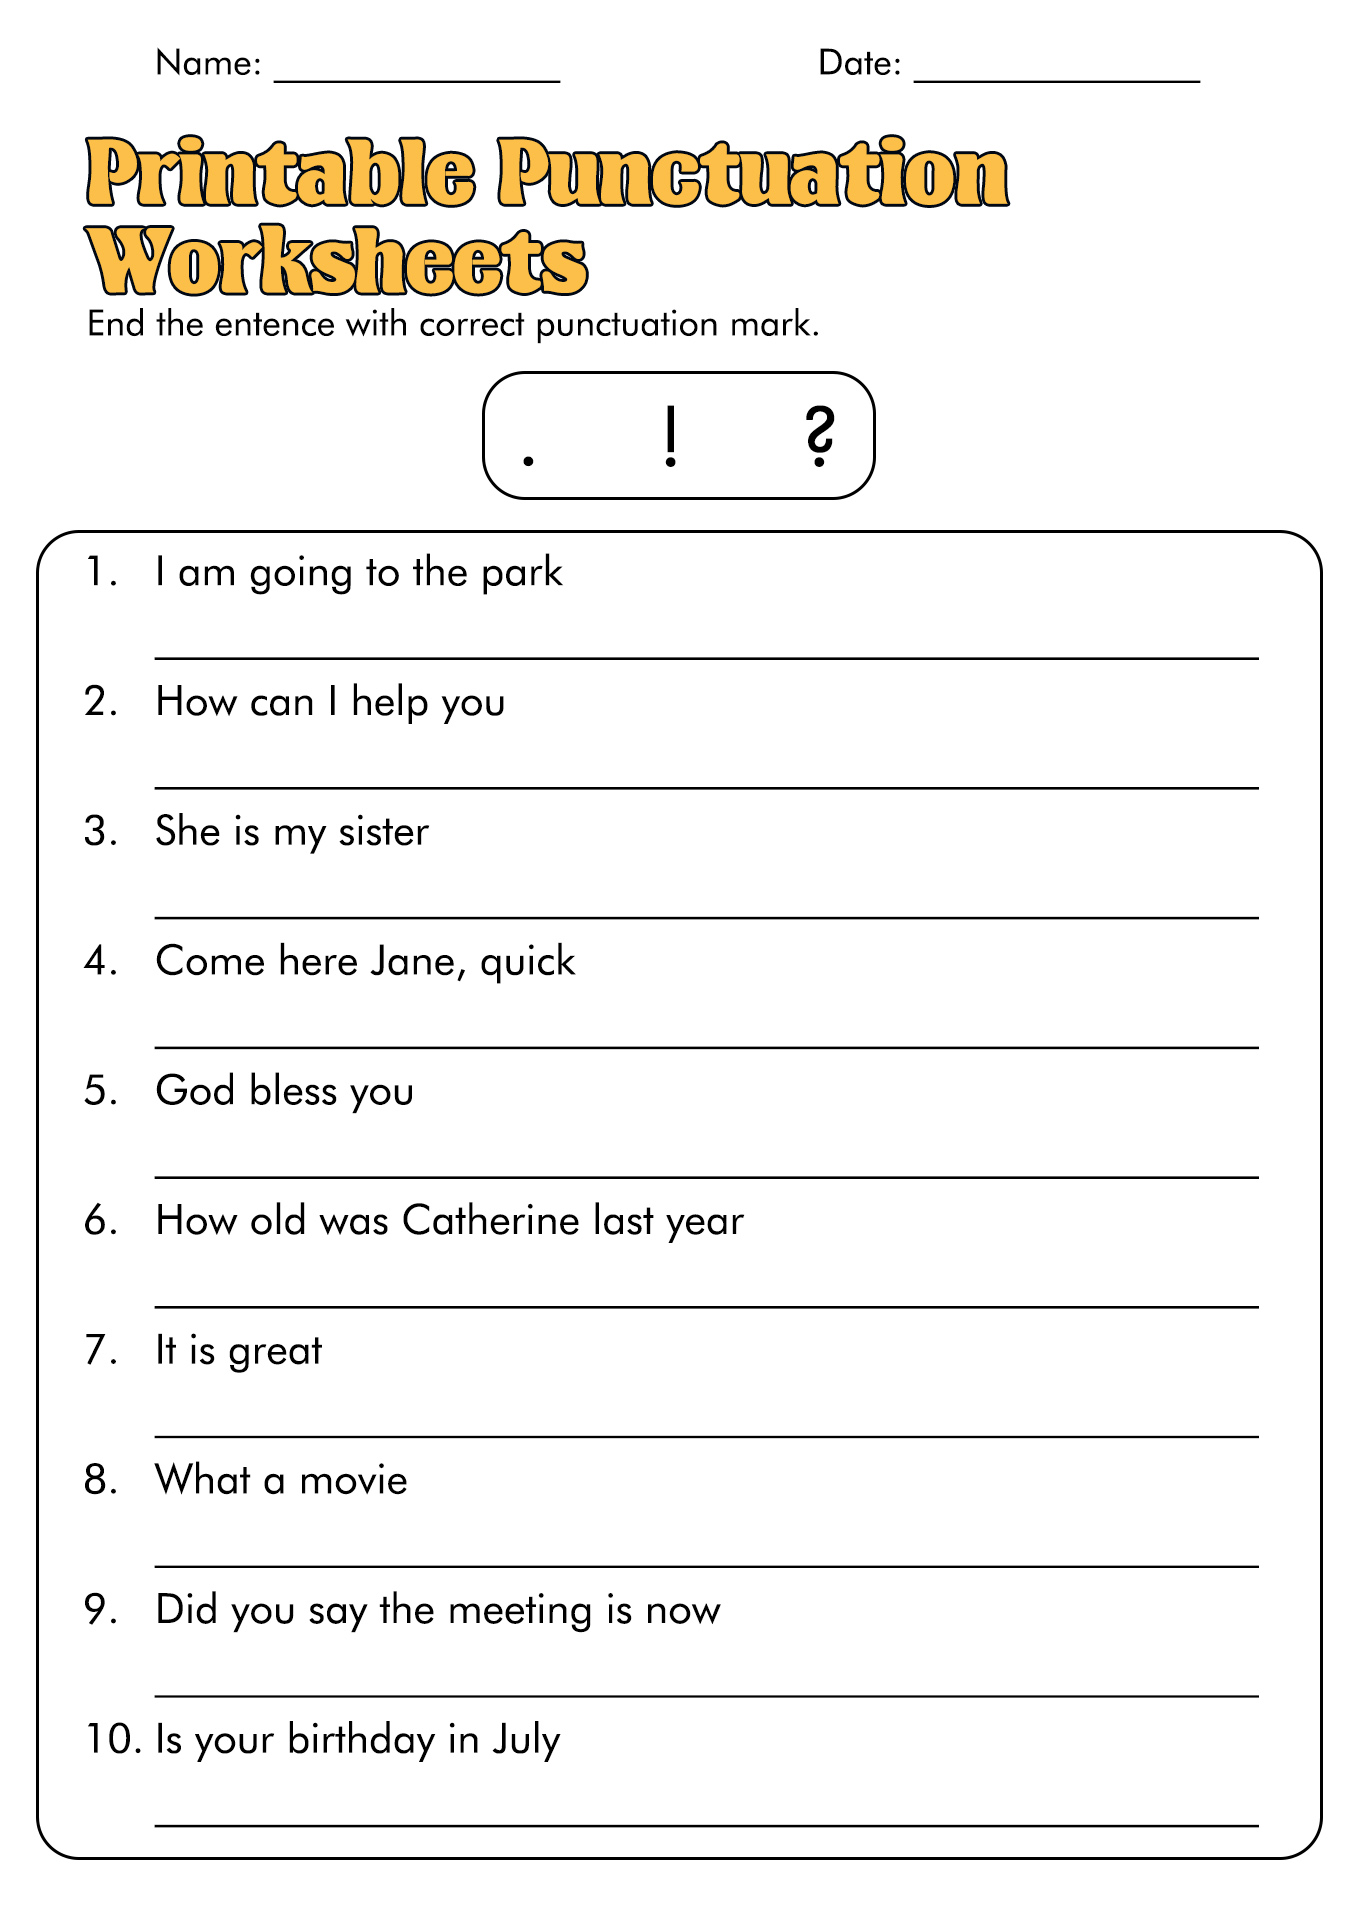 Printable Punctuation Worksheets Image